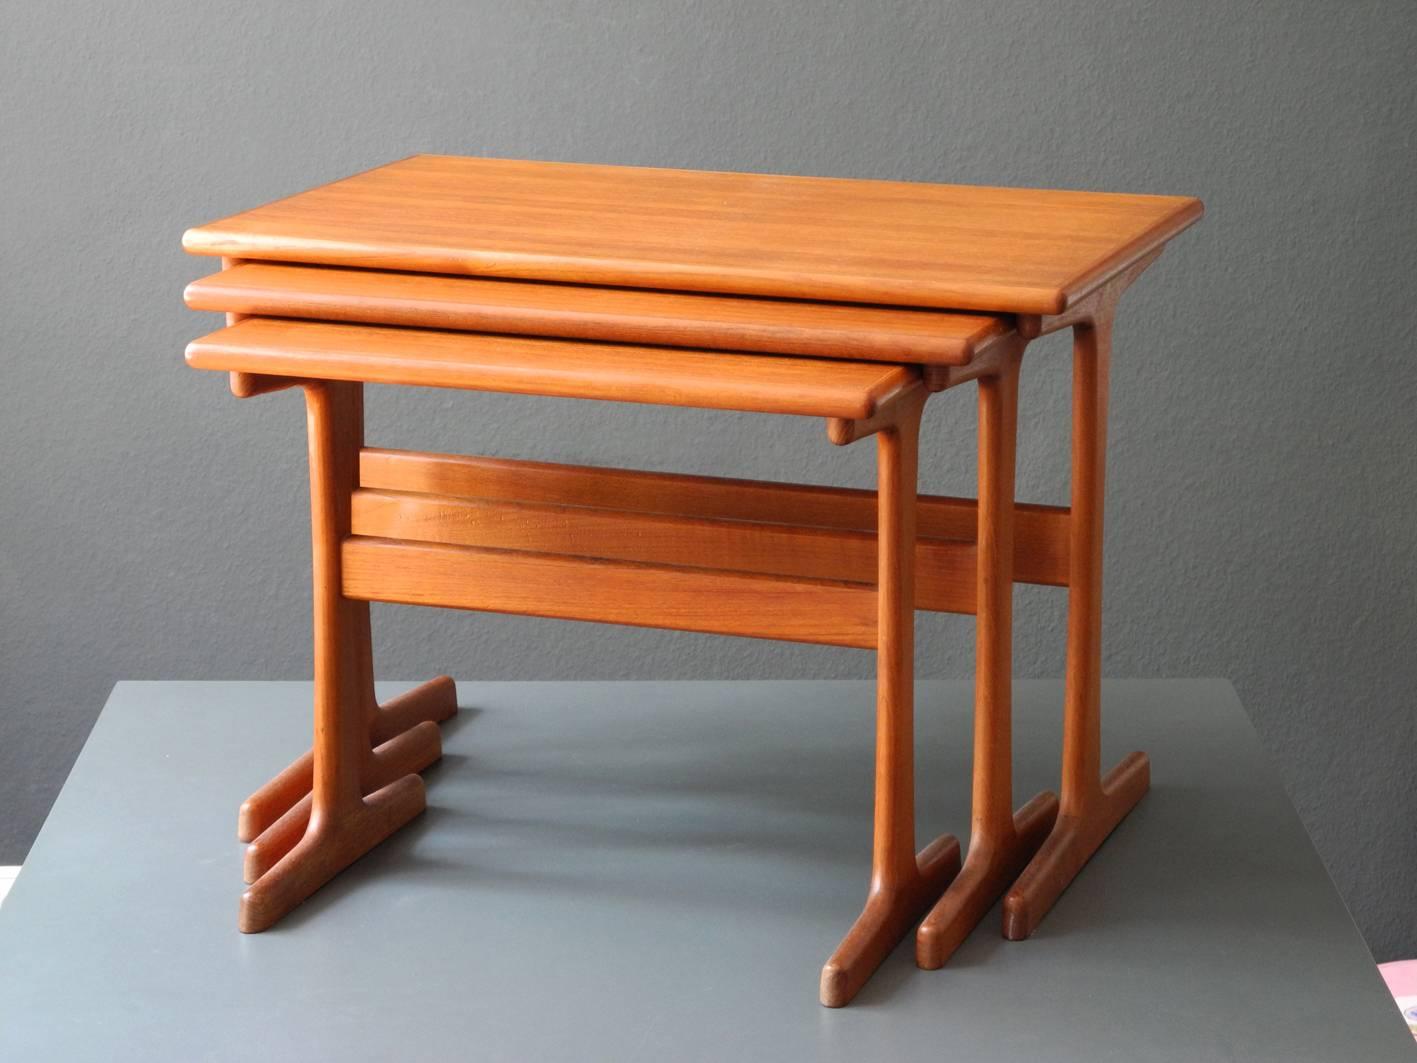 Original 1960s Kai Kristiansen teak set of three tables, side tables, nesting tables. Made in Denmark by Vildbjerg Møbelfabrik.
Beautiful minimalist Danish design in a fantastic vintage condition.
No damages to all three tables, not wobbly and